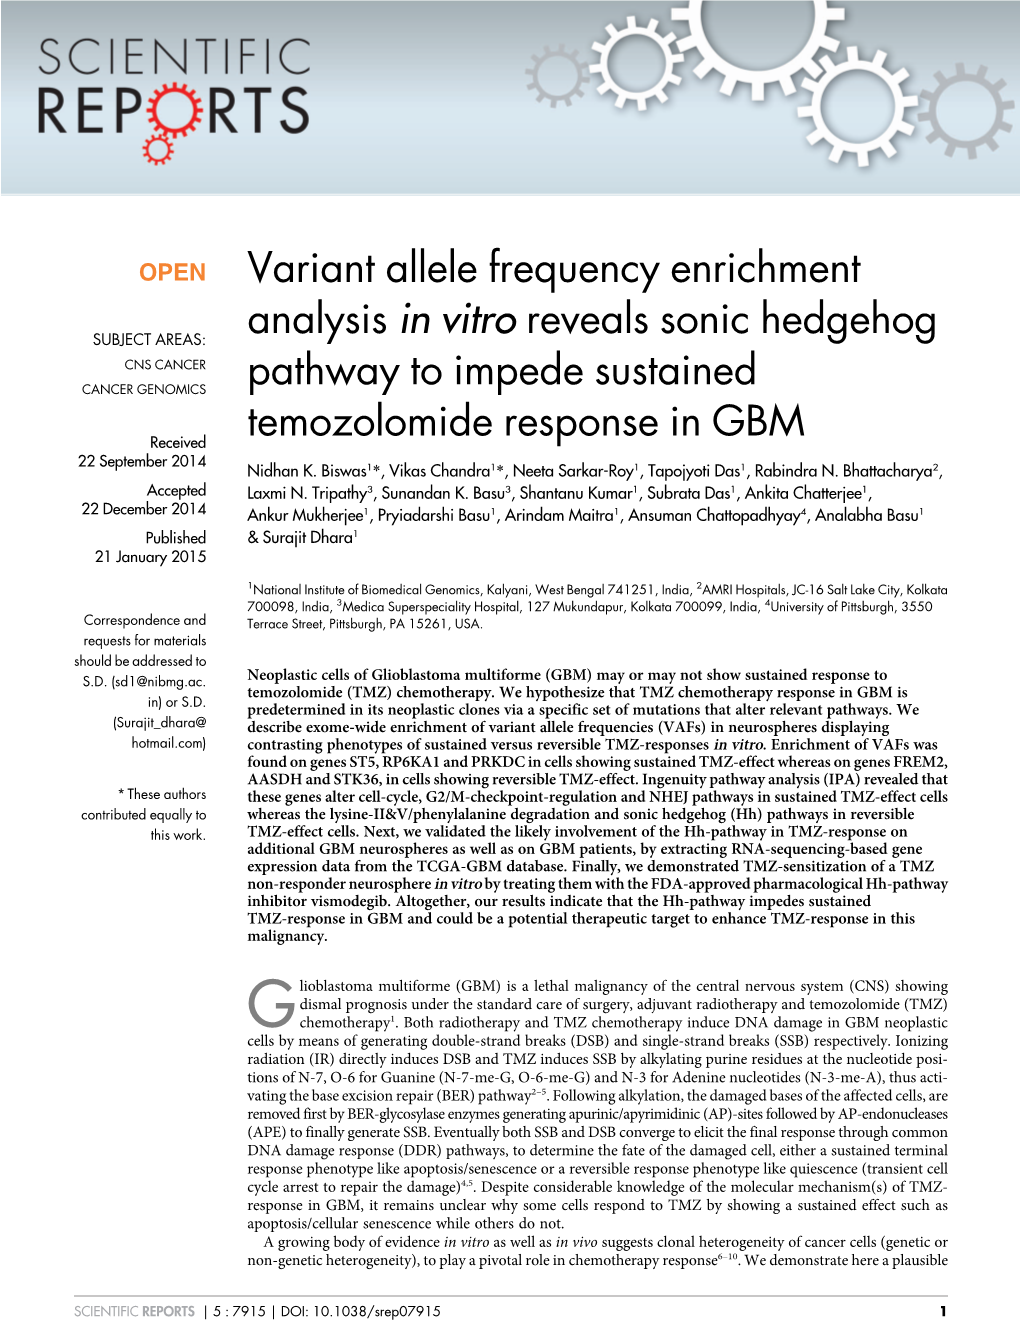 Variant Allele Frequency Enrichment Analysis in Vitro Reveals Sonic Hedgehog Pathway to Impede Sustained Temozolomide Response in GBM